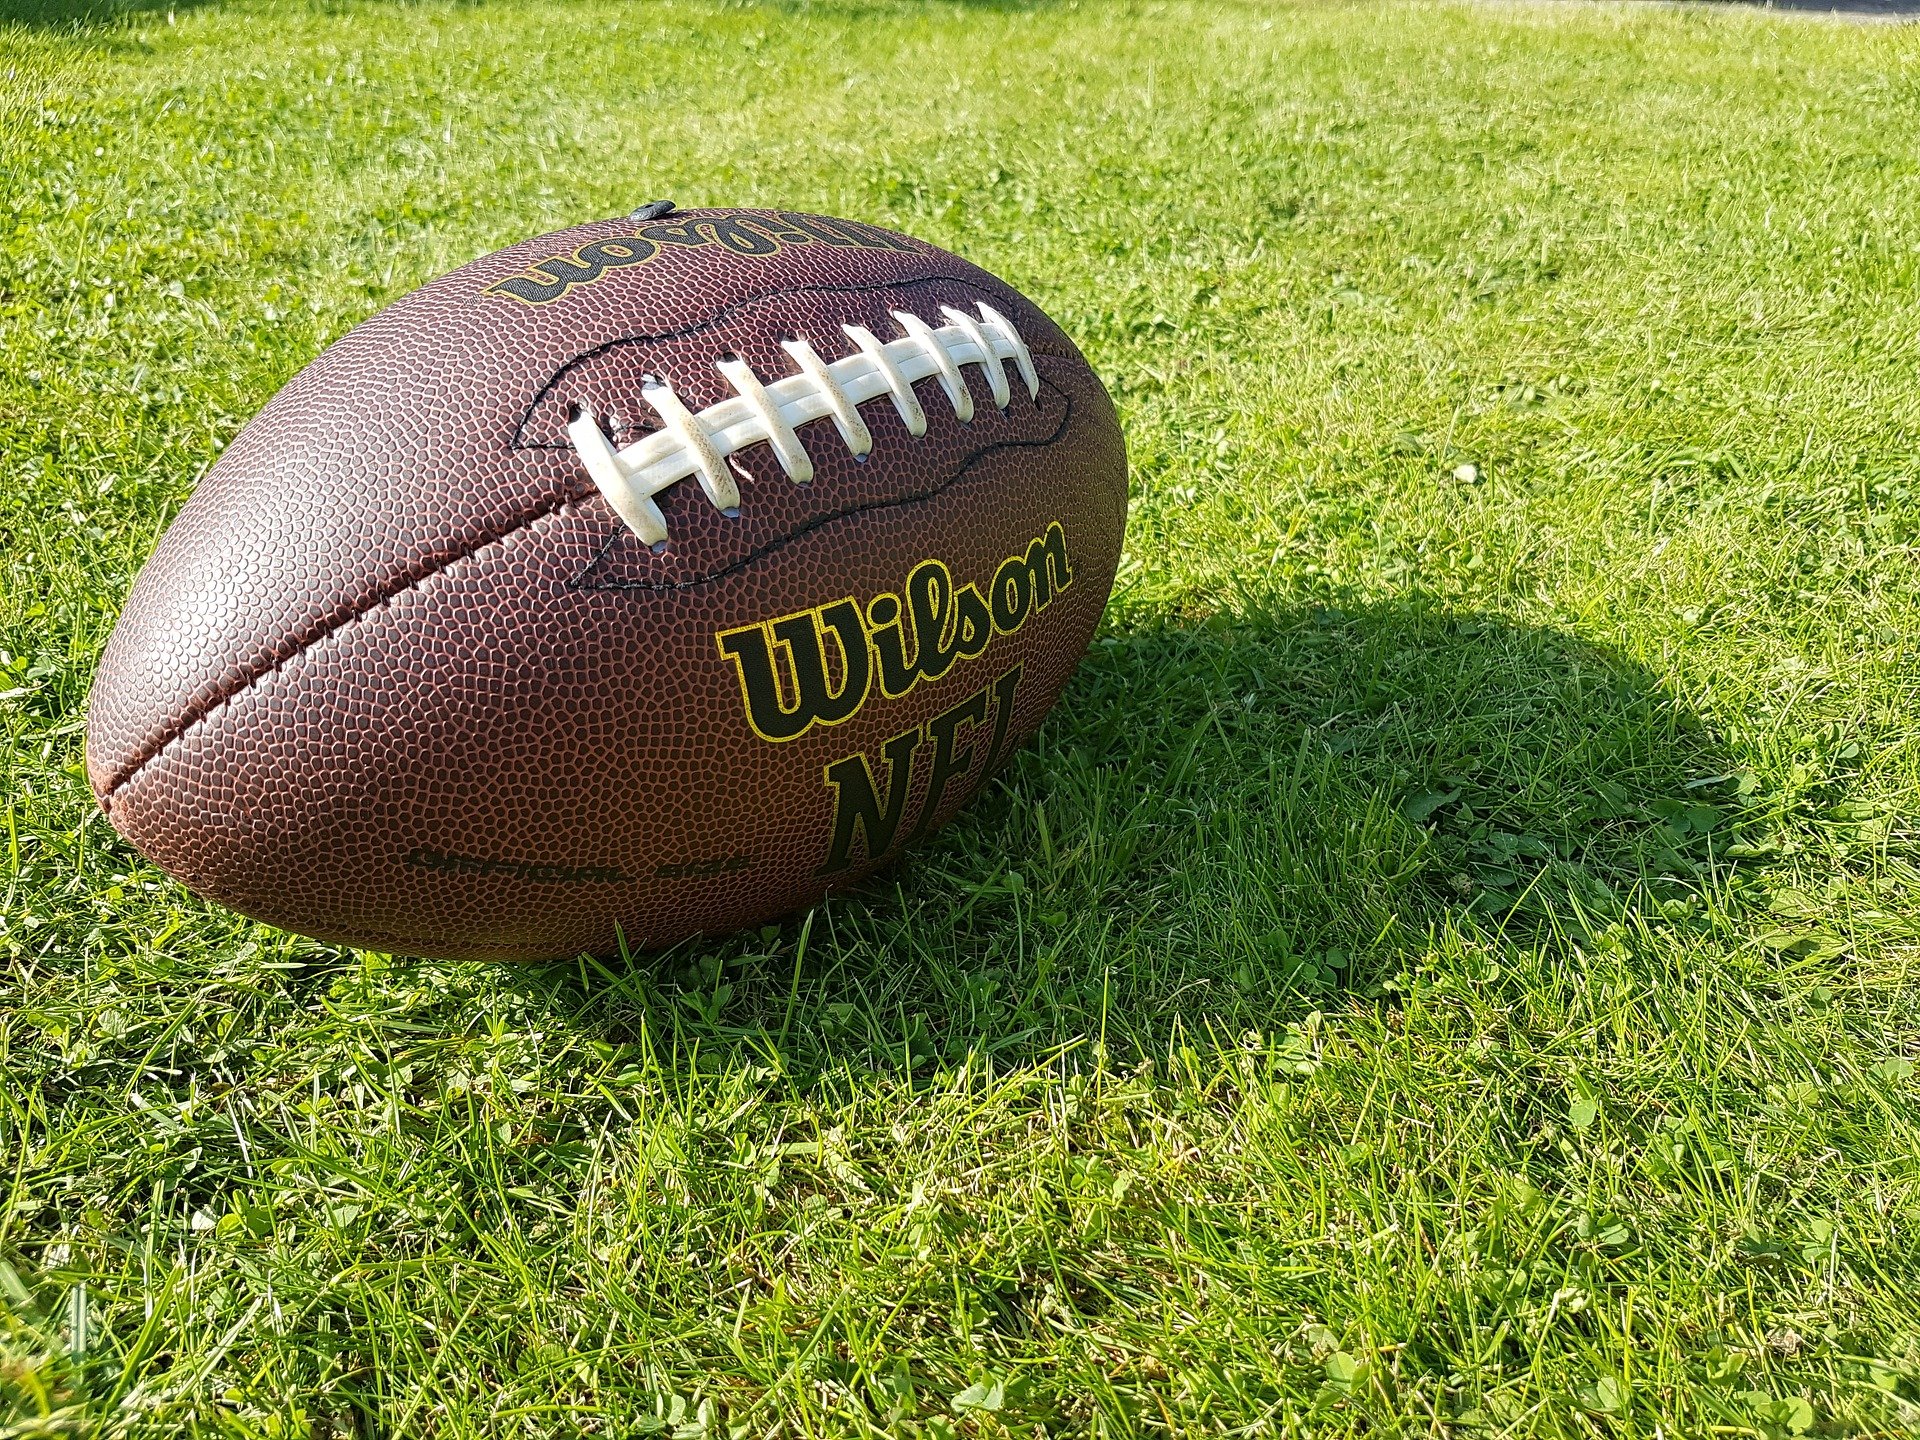 A football on a field. | Photo: Pixabay/Oliver Cardall